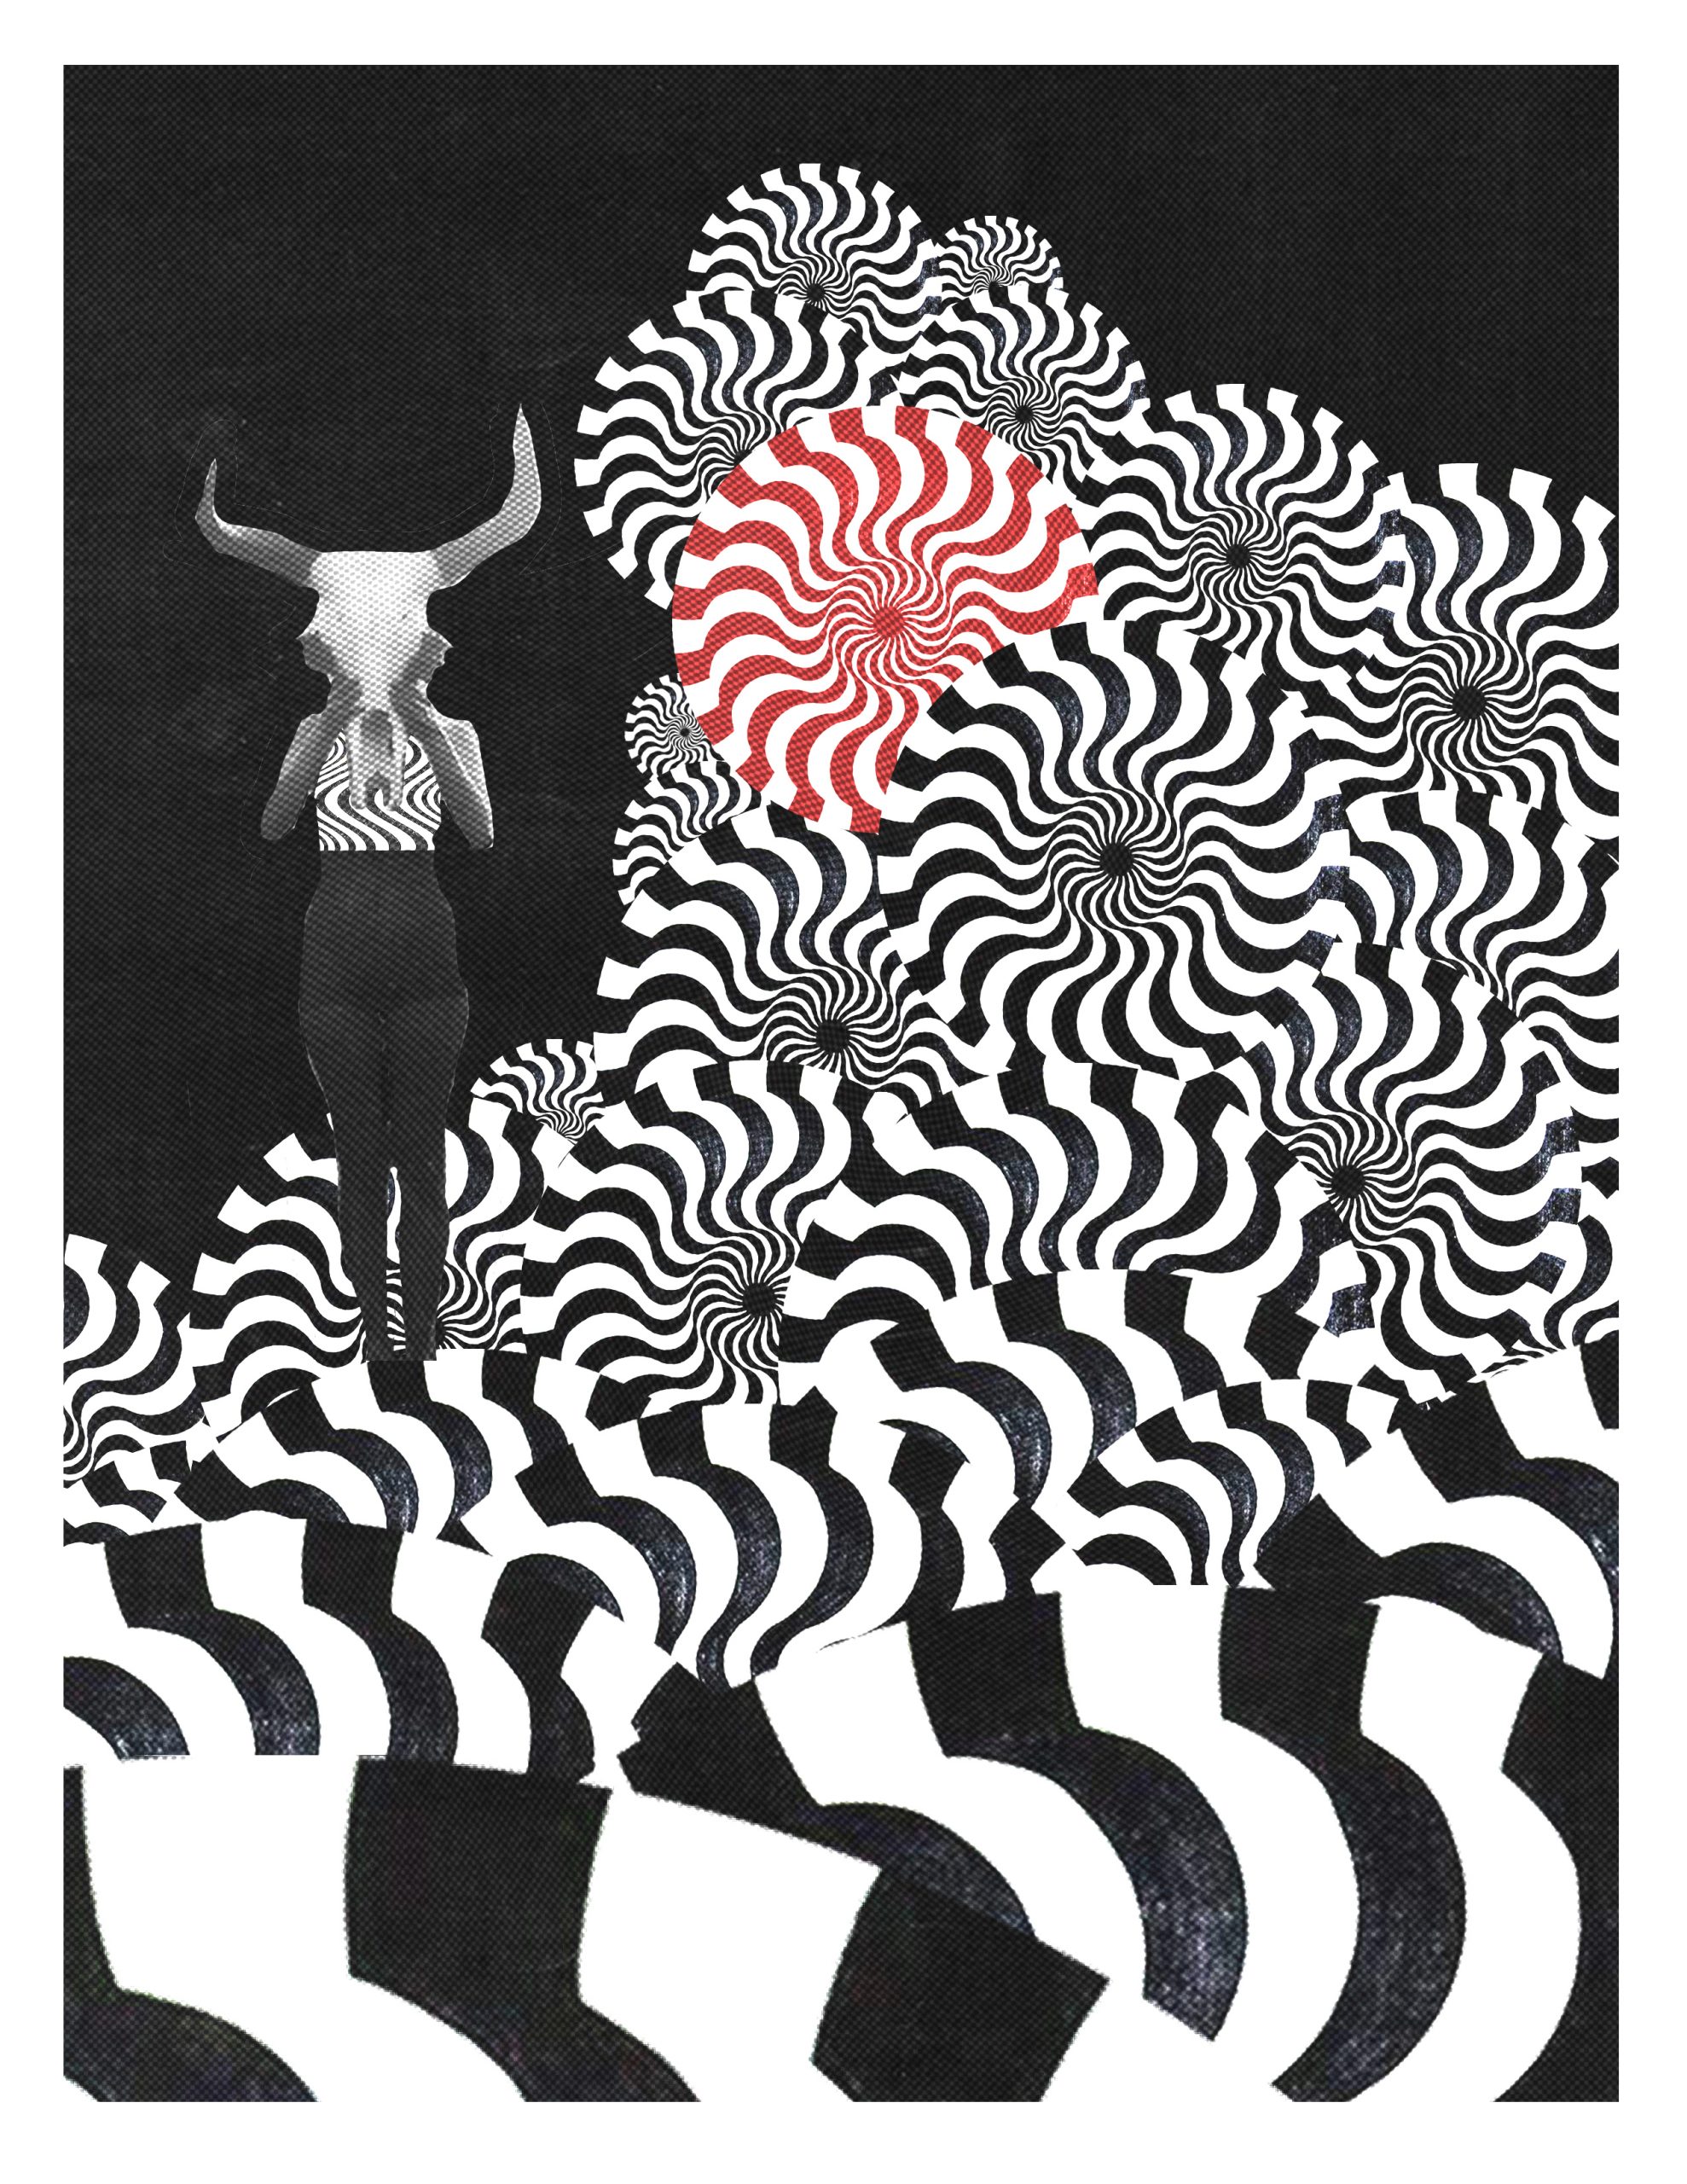 A female figure masking her face with a bull's skull, while standing in an abstract field of billowing pinwheels, all in black and white, save for one pinwheel.